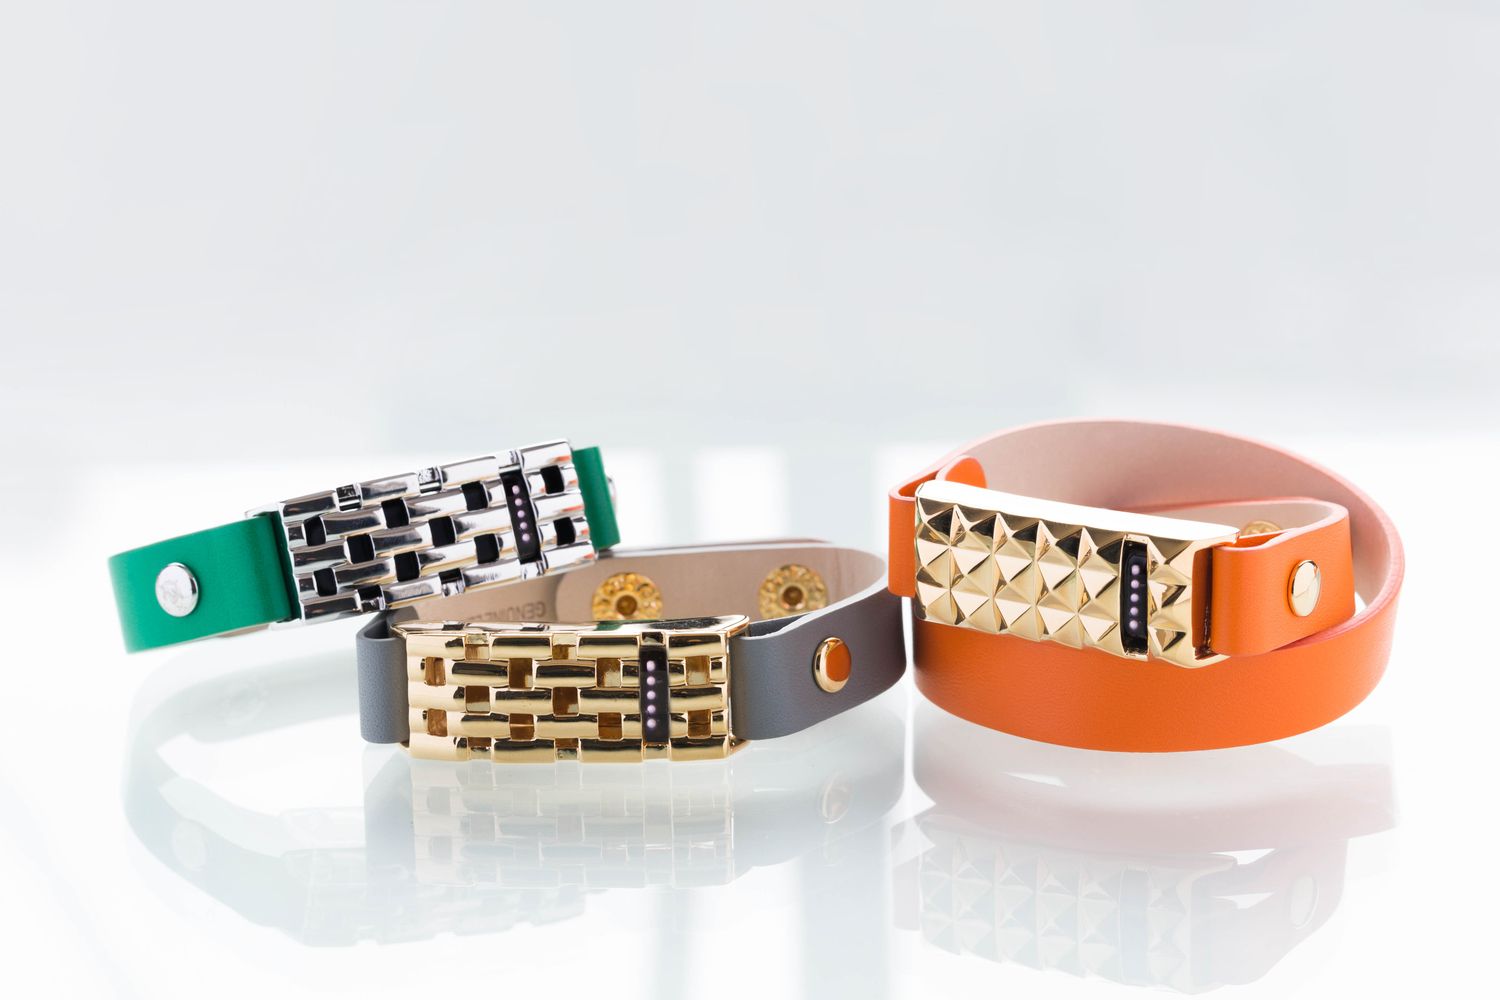 Bezels & Bytes Fitbit leather jewelry: Studs and basket weave, with a bright leather band